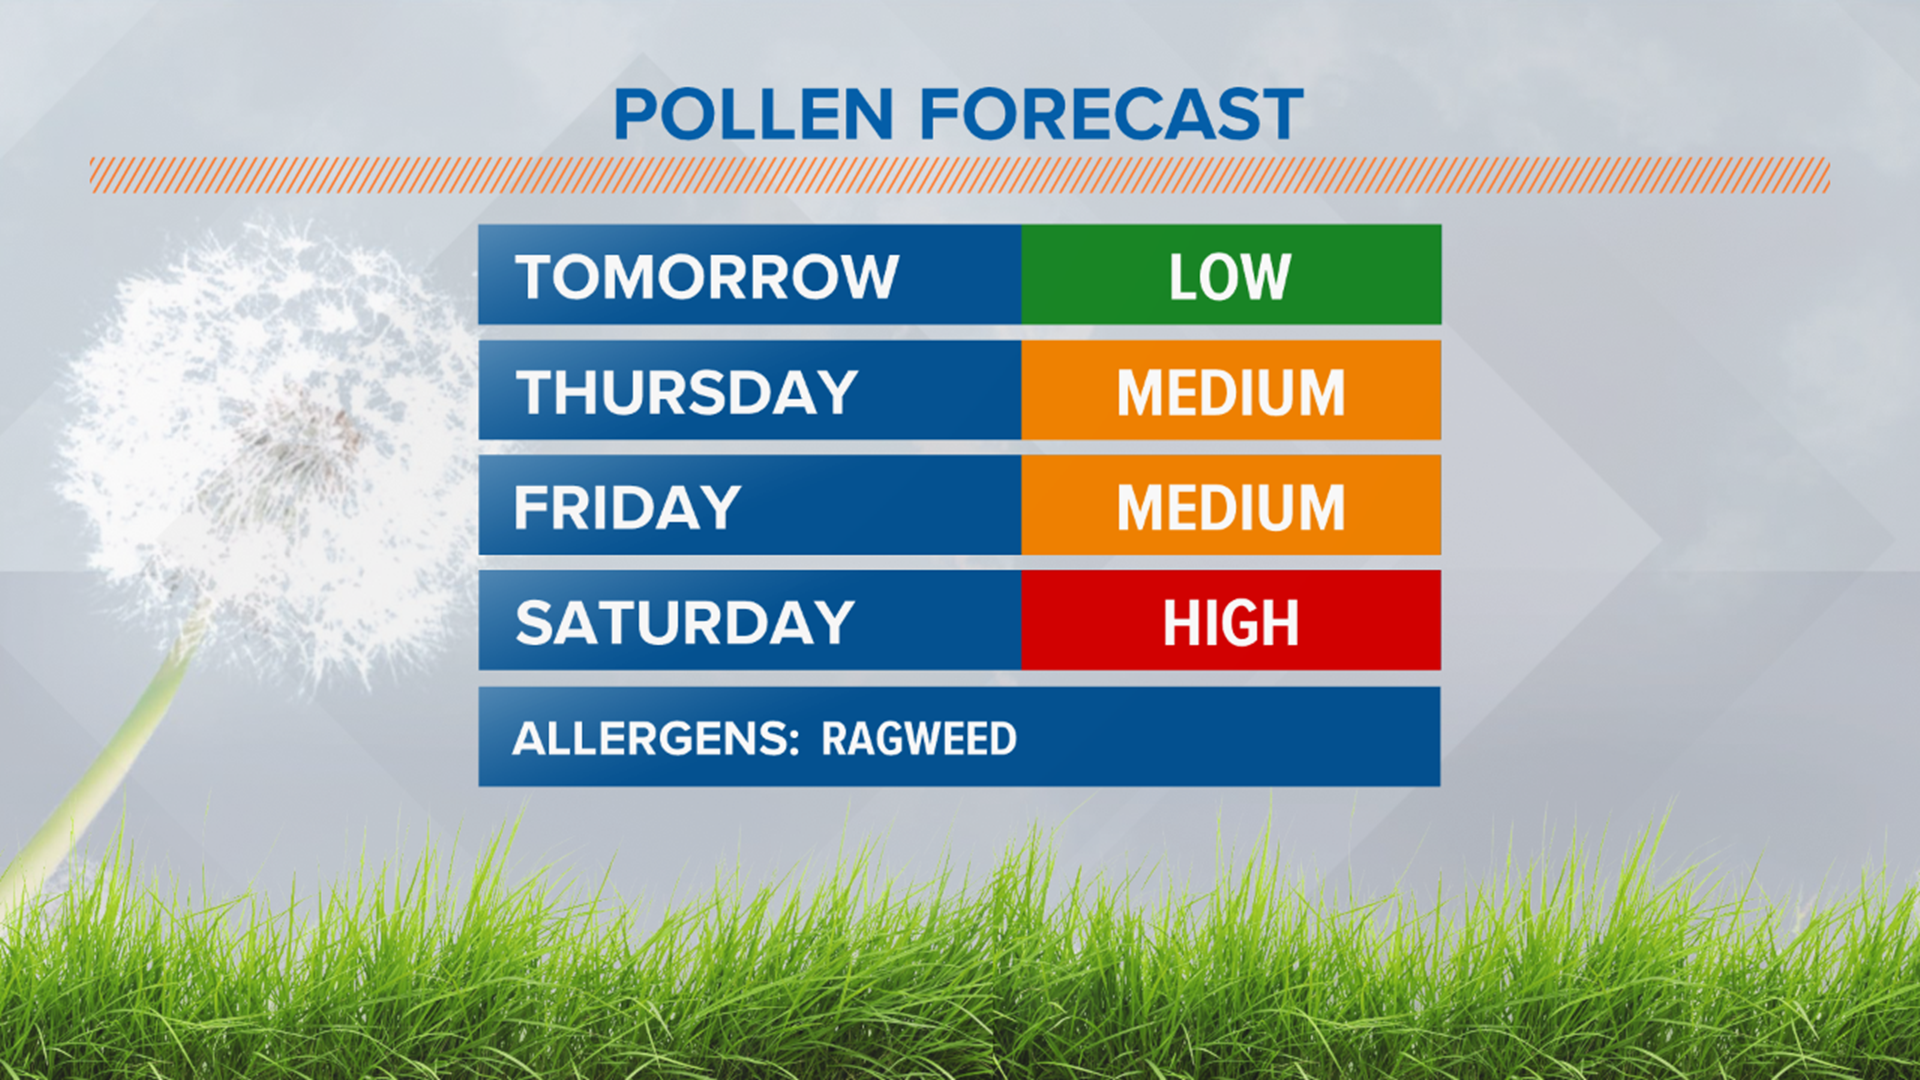 Seasonal allergy sufferers are now dealing with ragweed, known as the main allergen from late summer through the first frost.